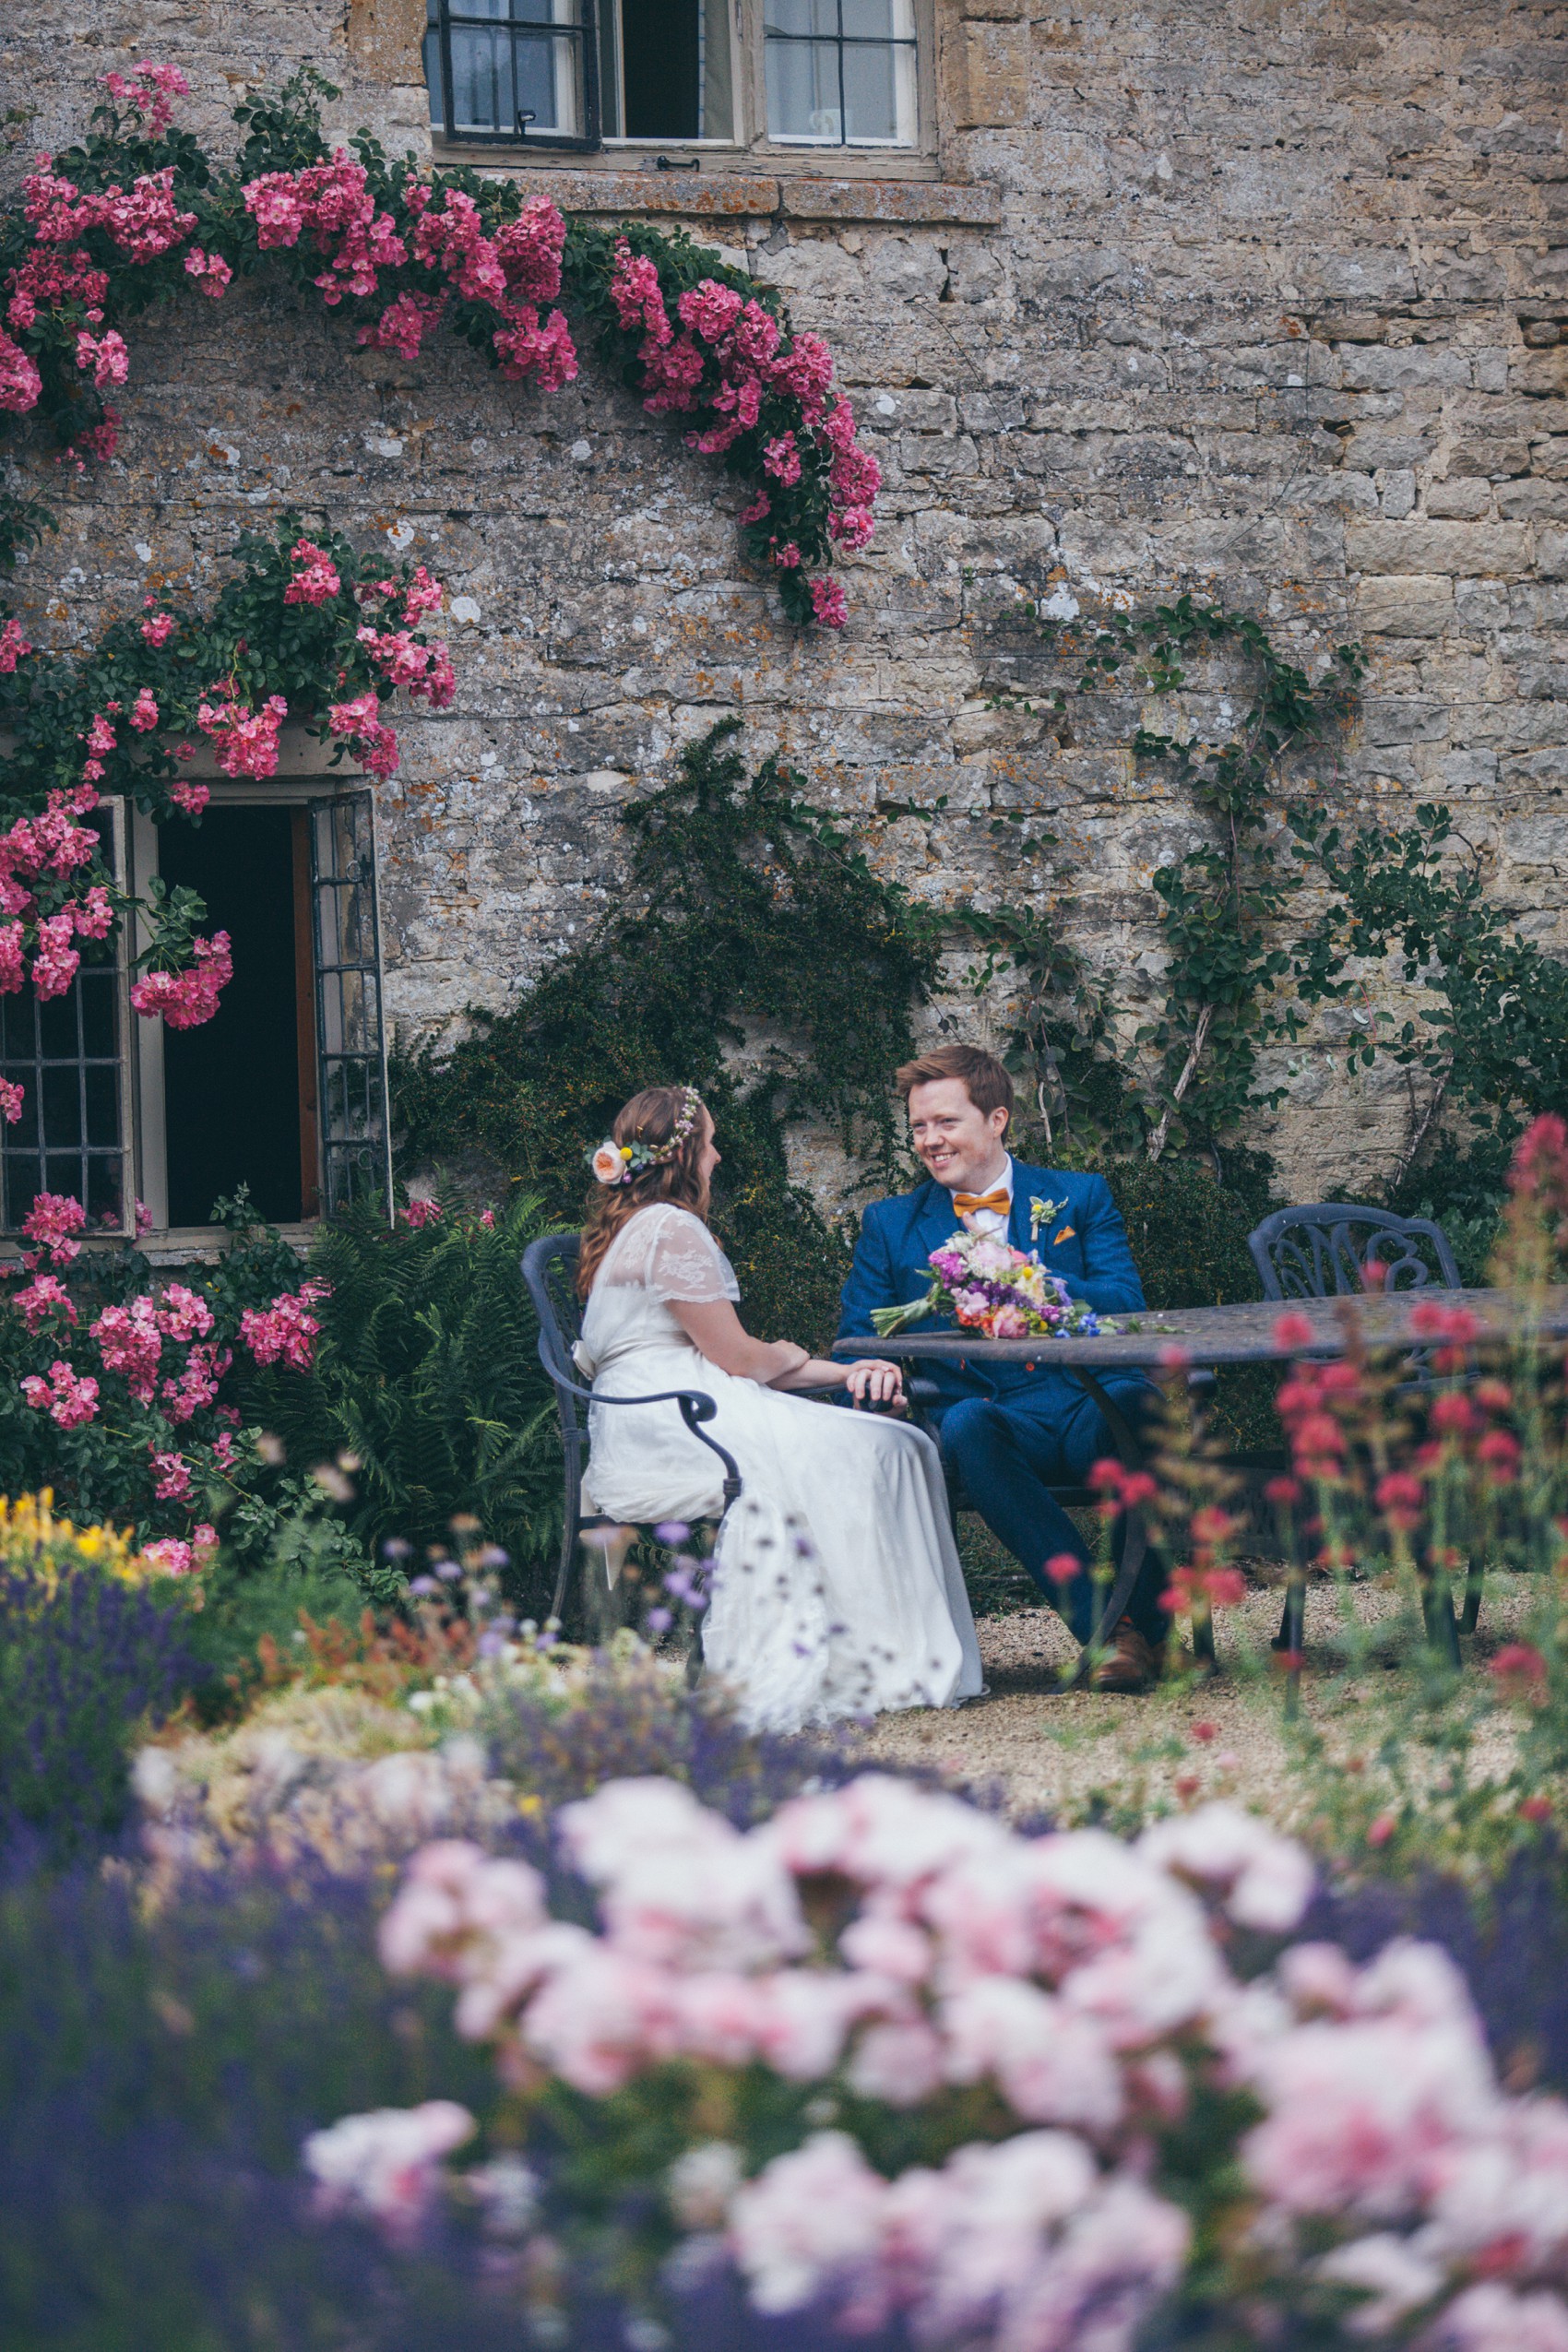 Charlie Brear dress colourful summer garden party wedding Caswell House  - A Timelessly Elegant Charlie Brear Dress for a Summer Garden Party Wedding at Caswell House